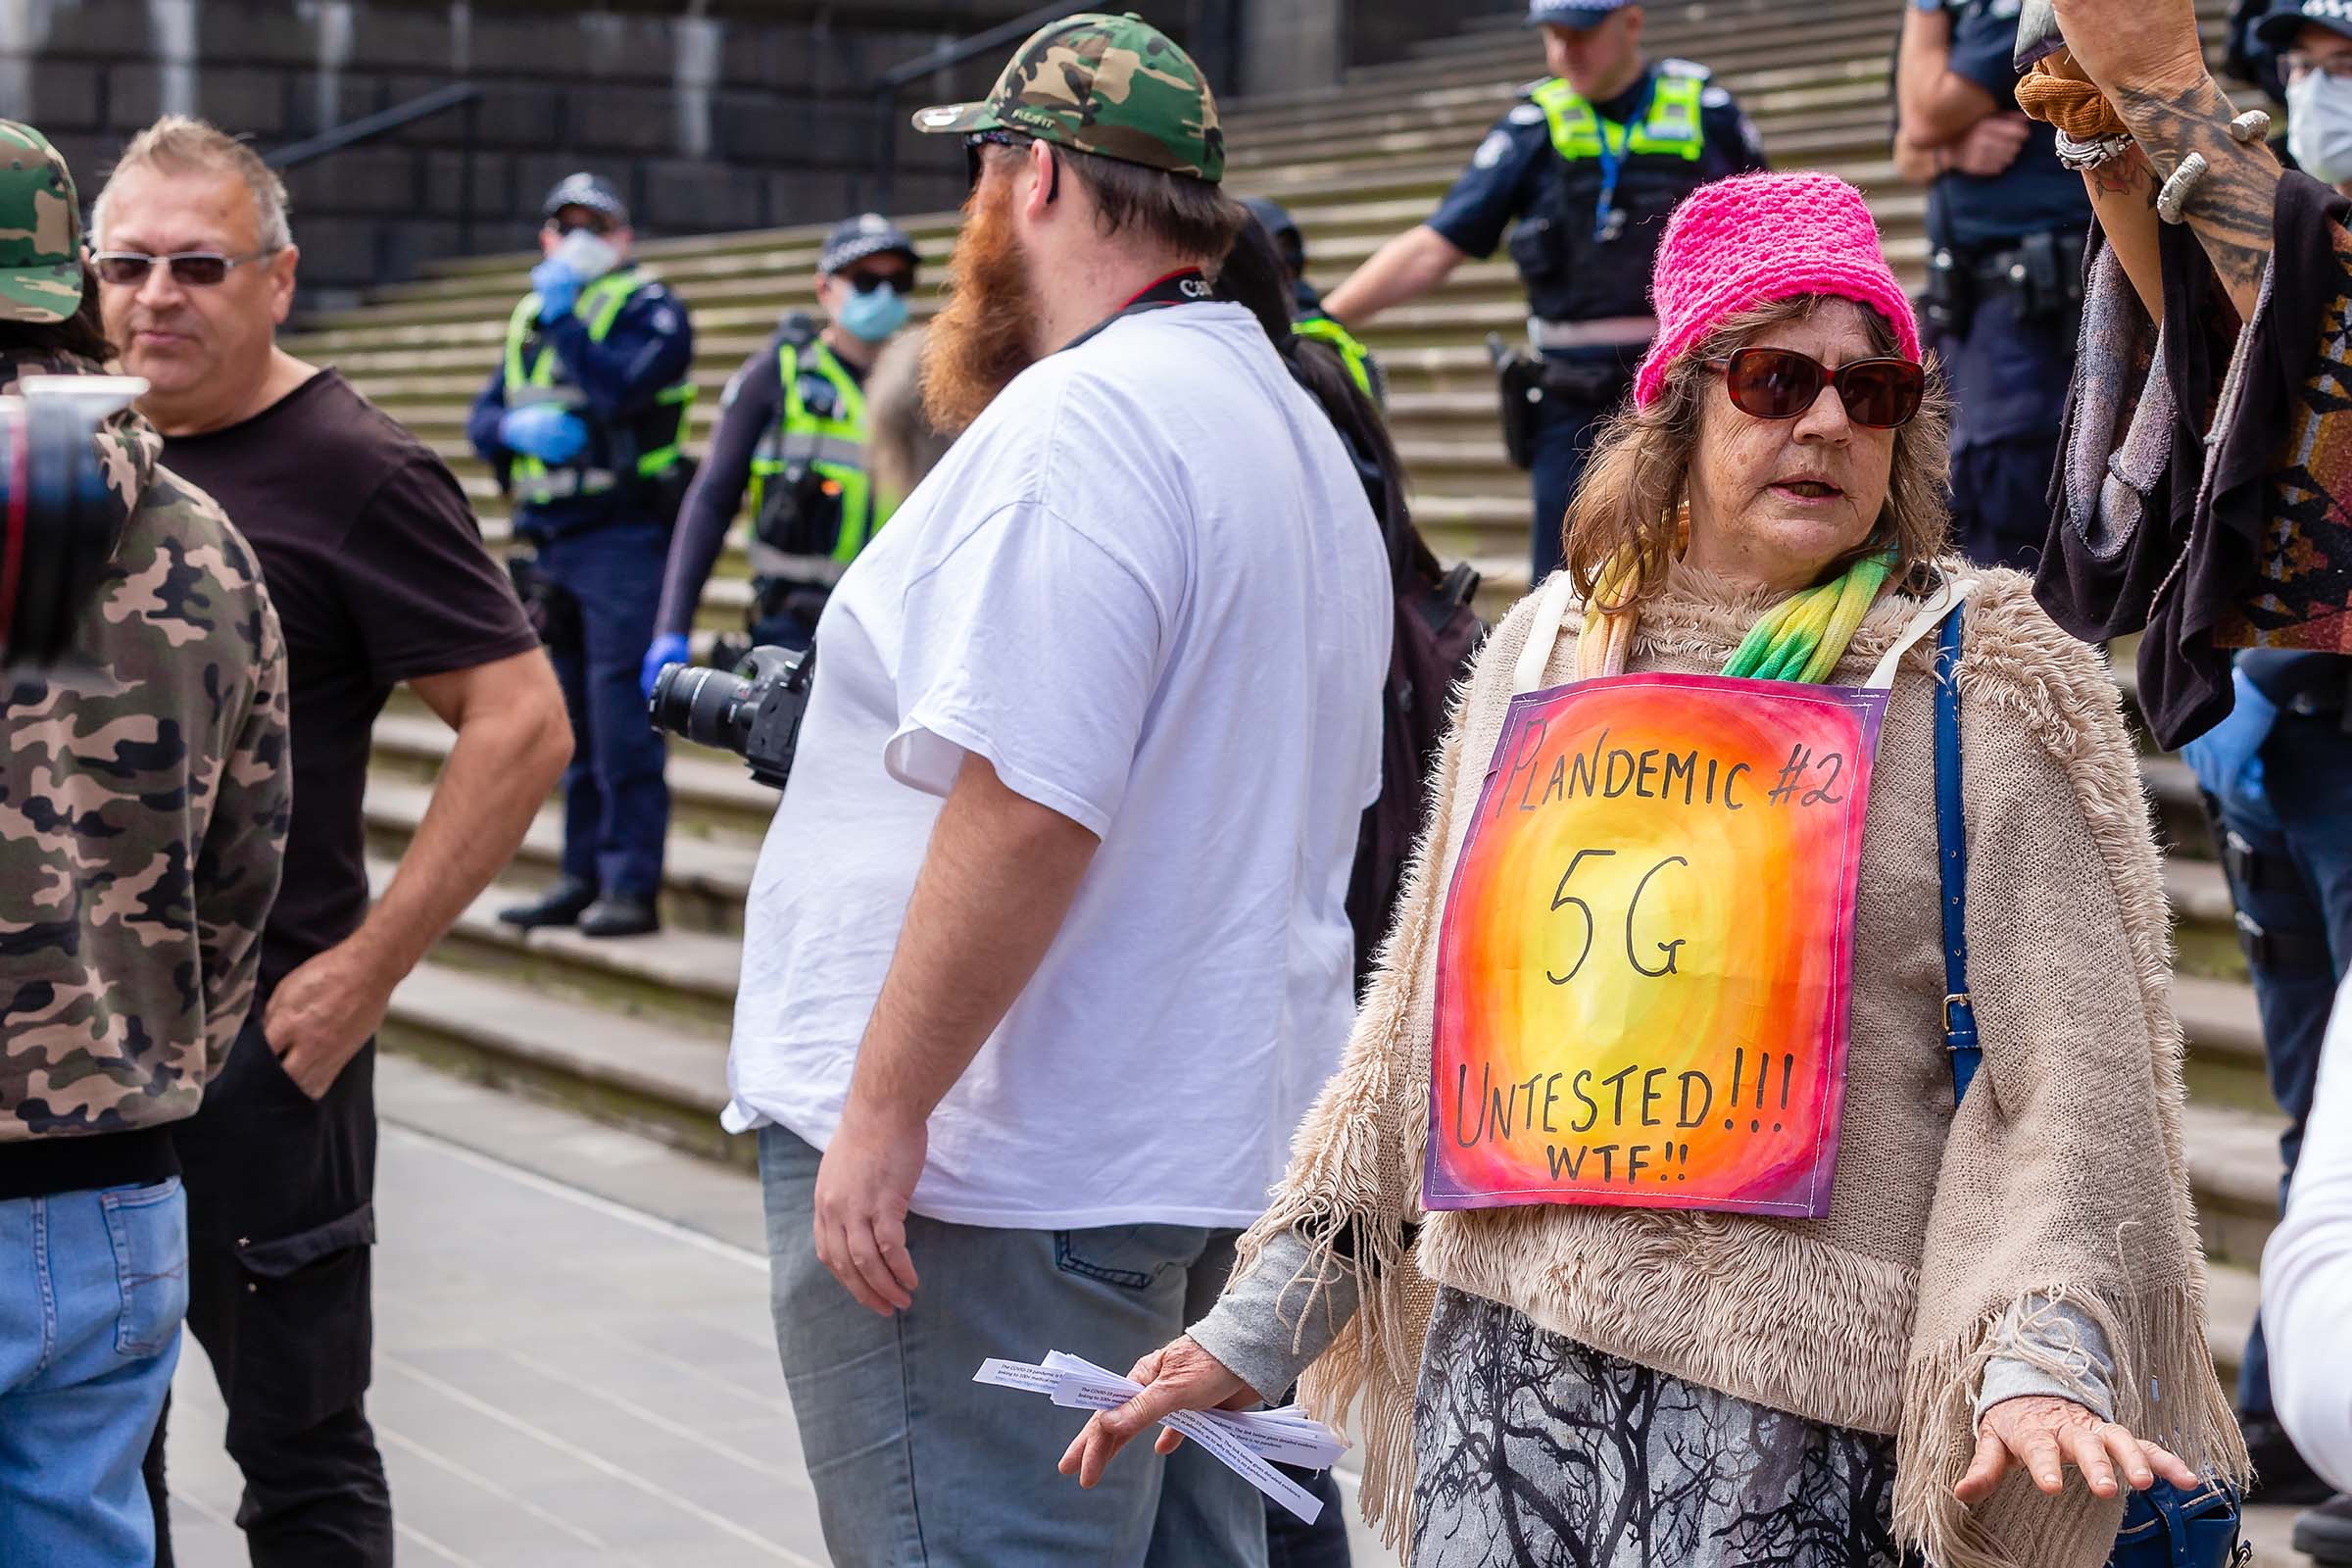 Many protesters blame 5G technology for the Coronavirus during the Coronavirus (COVID-19) Anti-Lockdown Protest at Parliament House in Melbourne on May 10, 2020. (Speed Media/Icon Sportswire/Getty Images)